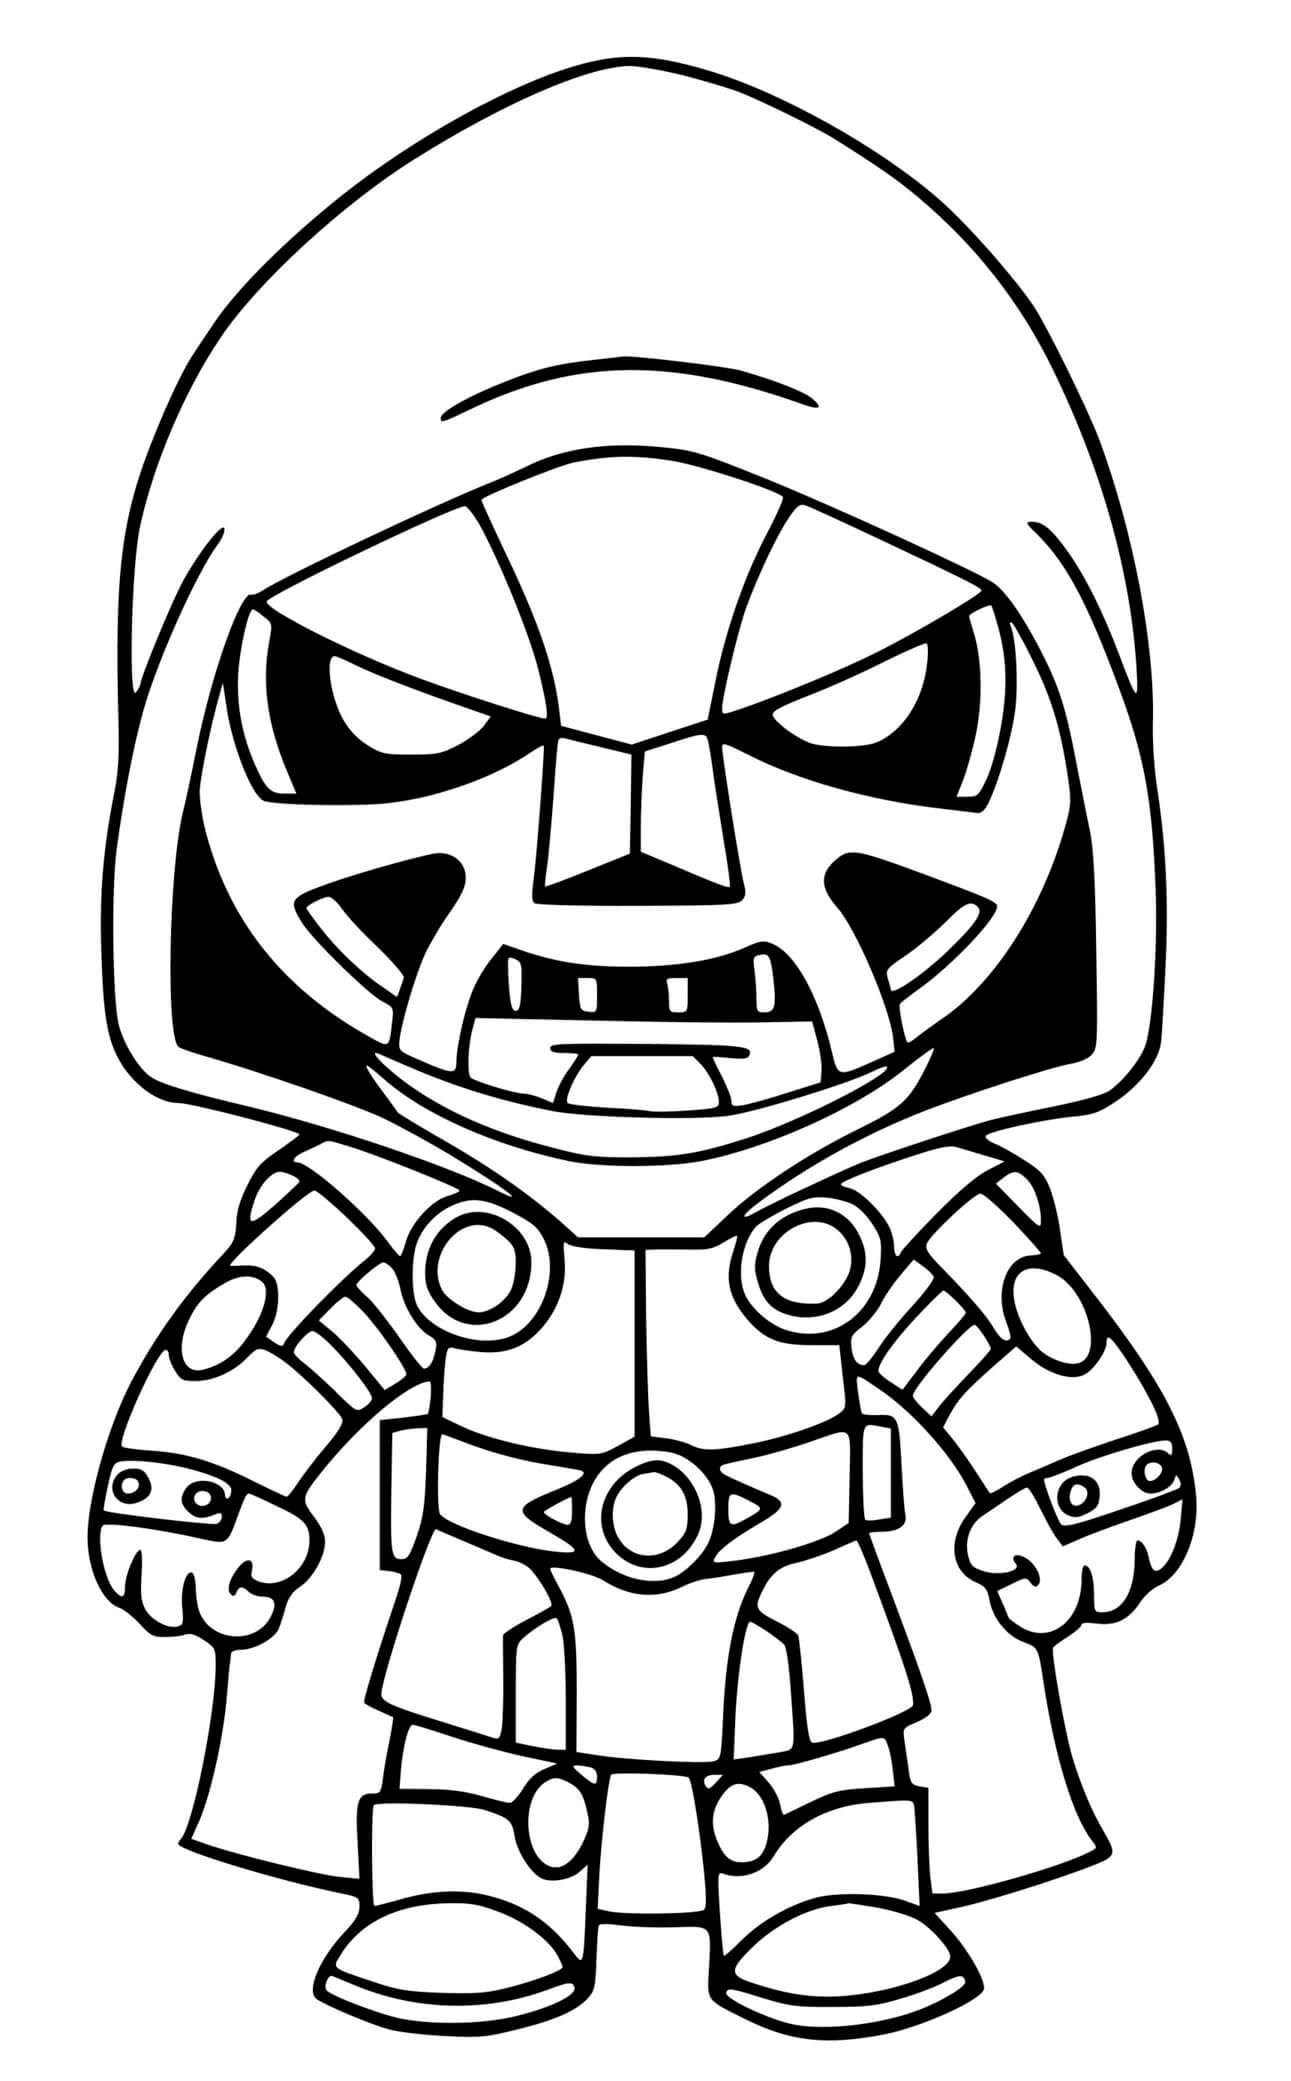 Doctor Doom Fortnite Coloring Pages - Coloring Cool